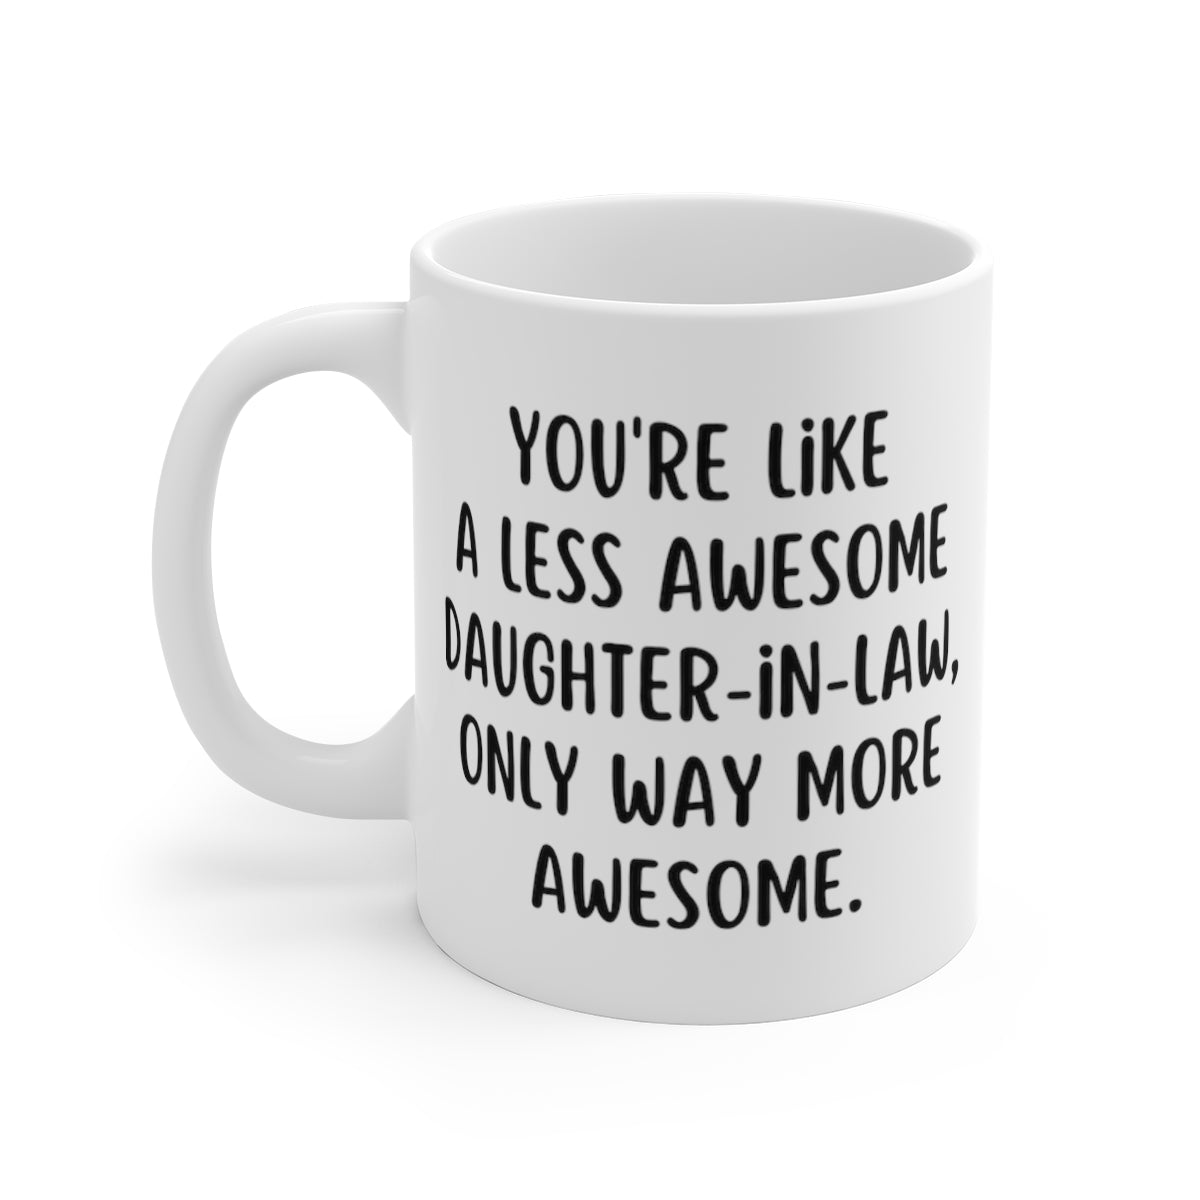 You're Like A Less Awesome Daughter-In-Law, Only Way More Awesome | Funny, Snarky Gift | White Ceramic Mug, Fun Block Font